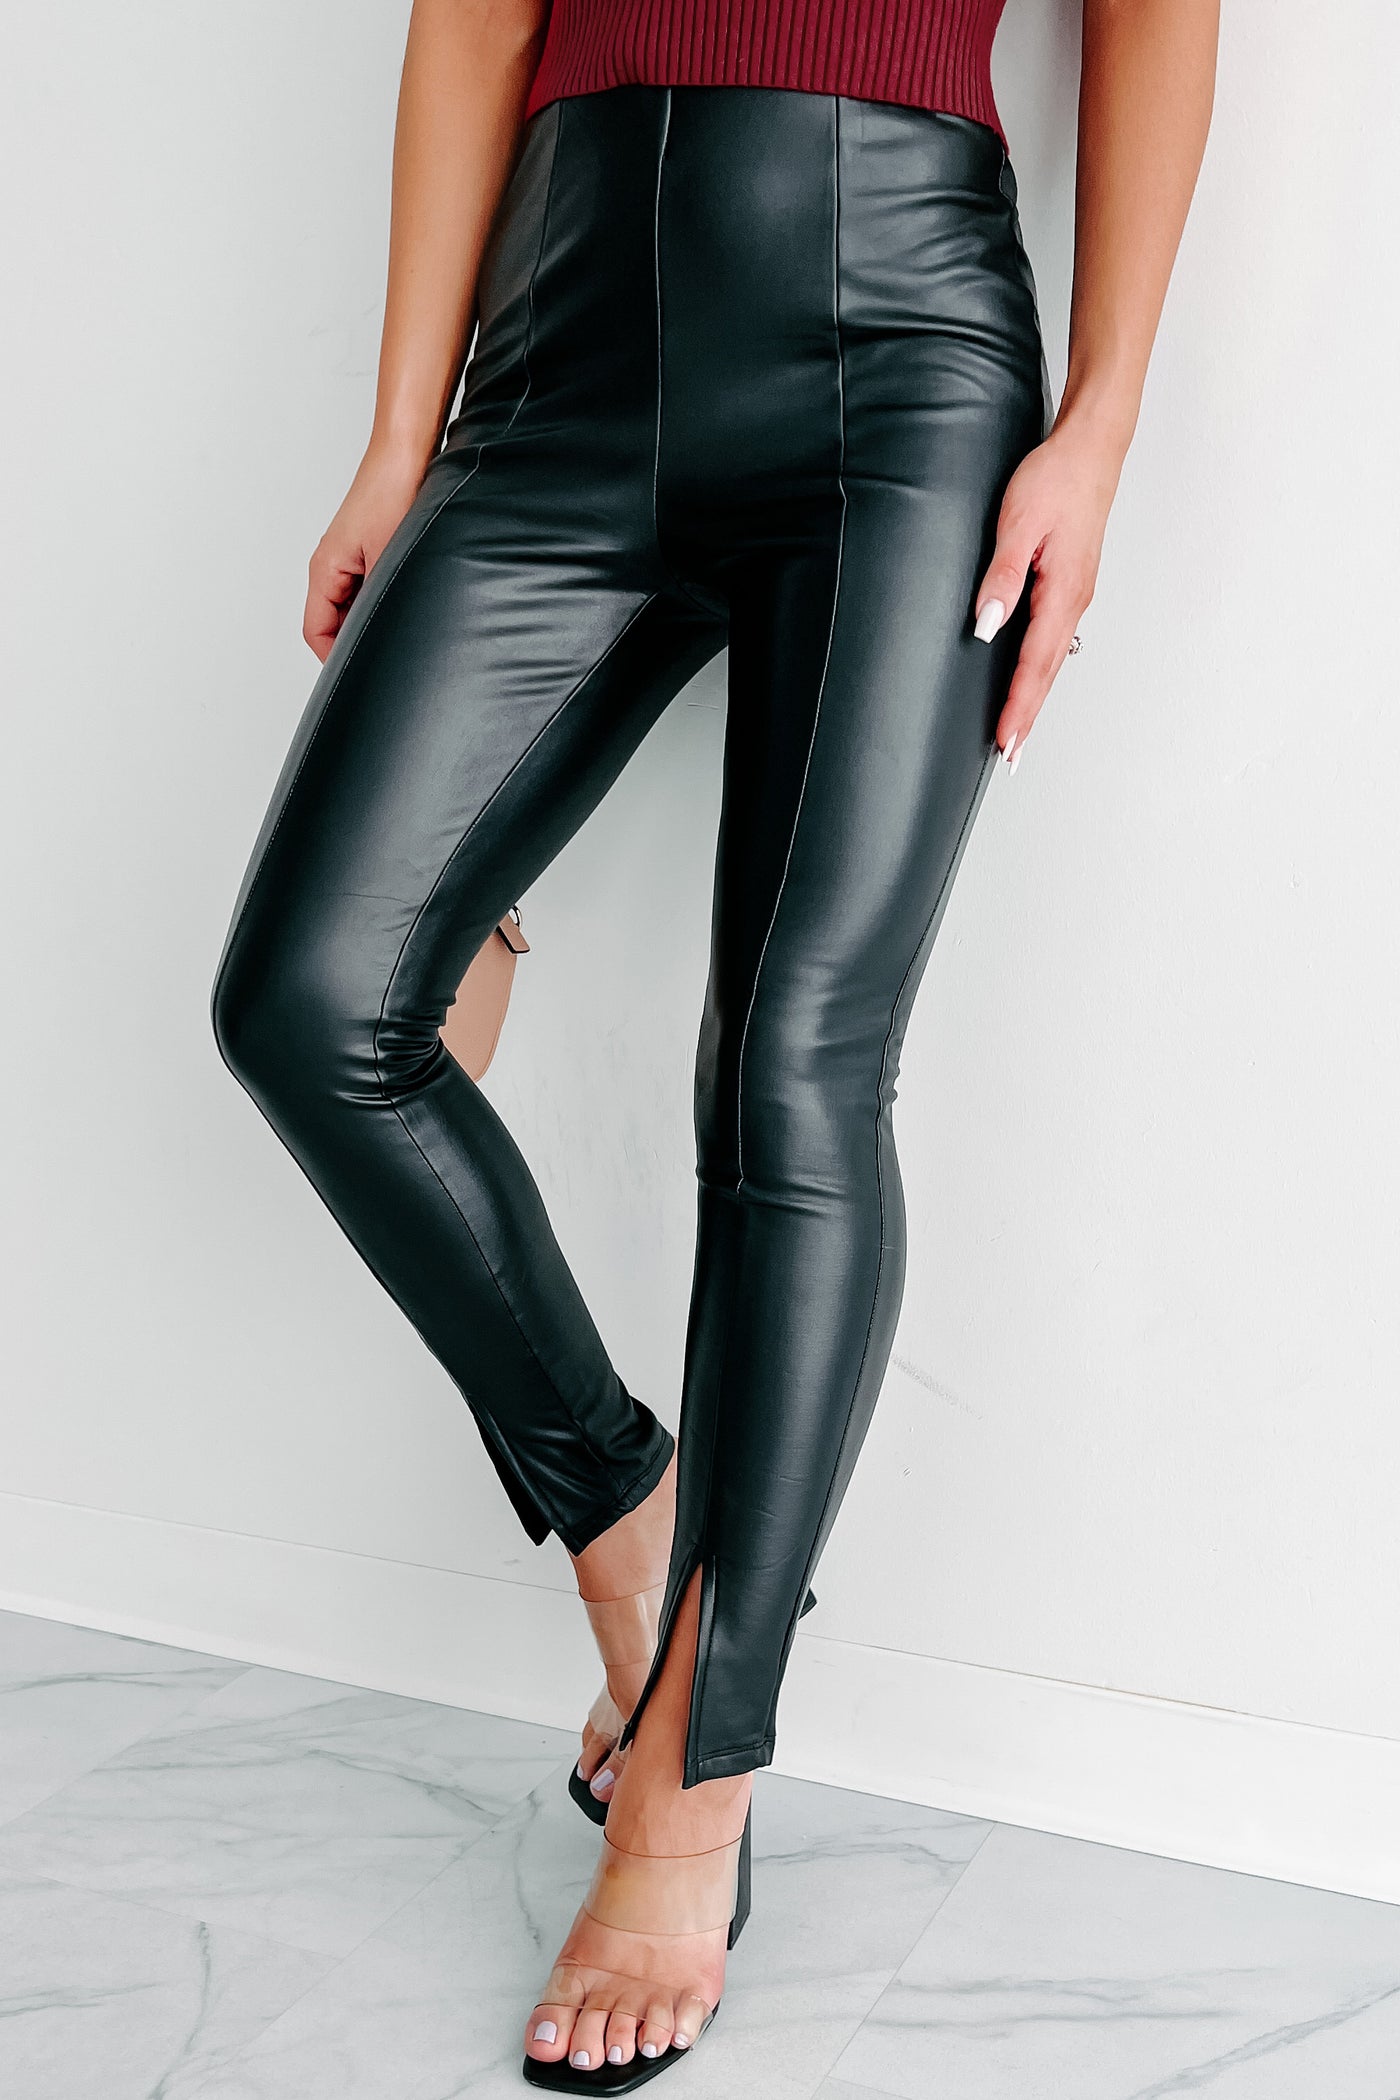  Leather Pants For Women Faux Leather Leggings Sexy Black Red  Custumes Skinny Tights For Casual XL